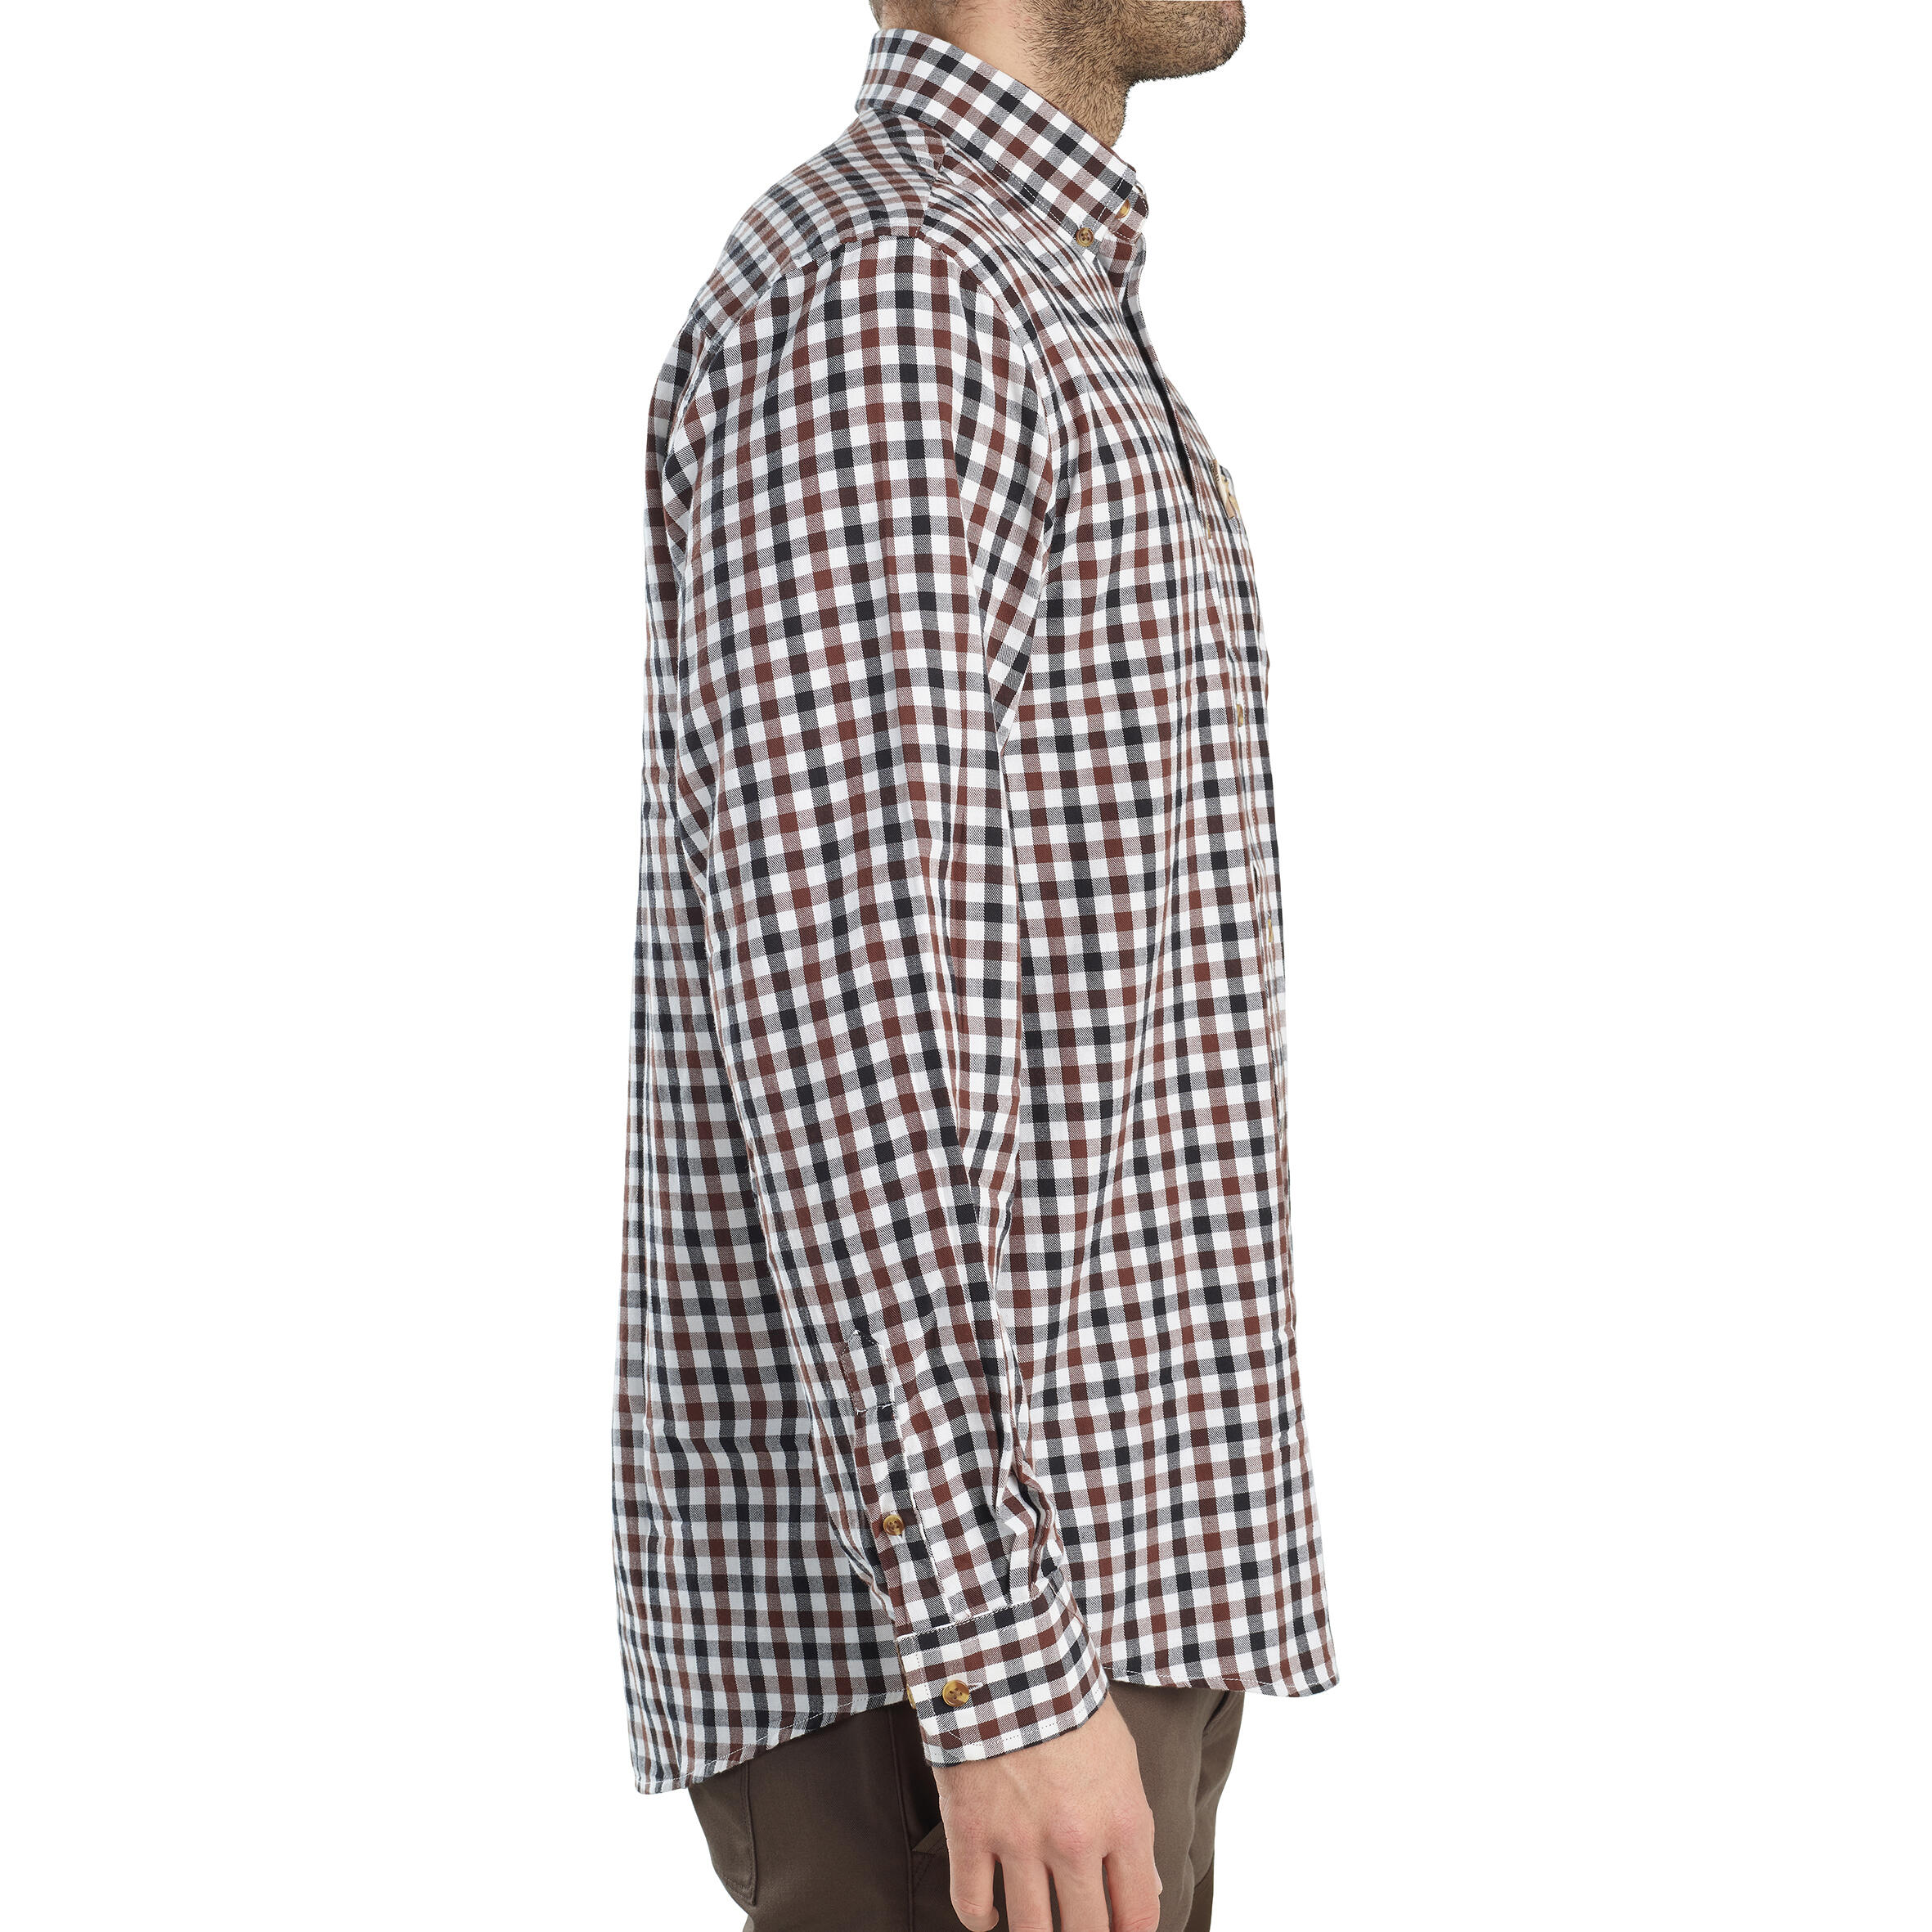 *Verney-Carron Vercors Hunting Checked Long Sleeved Shirt 